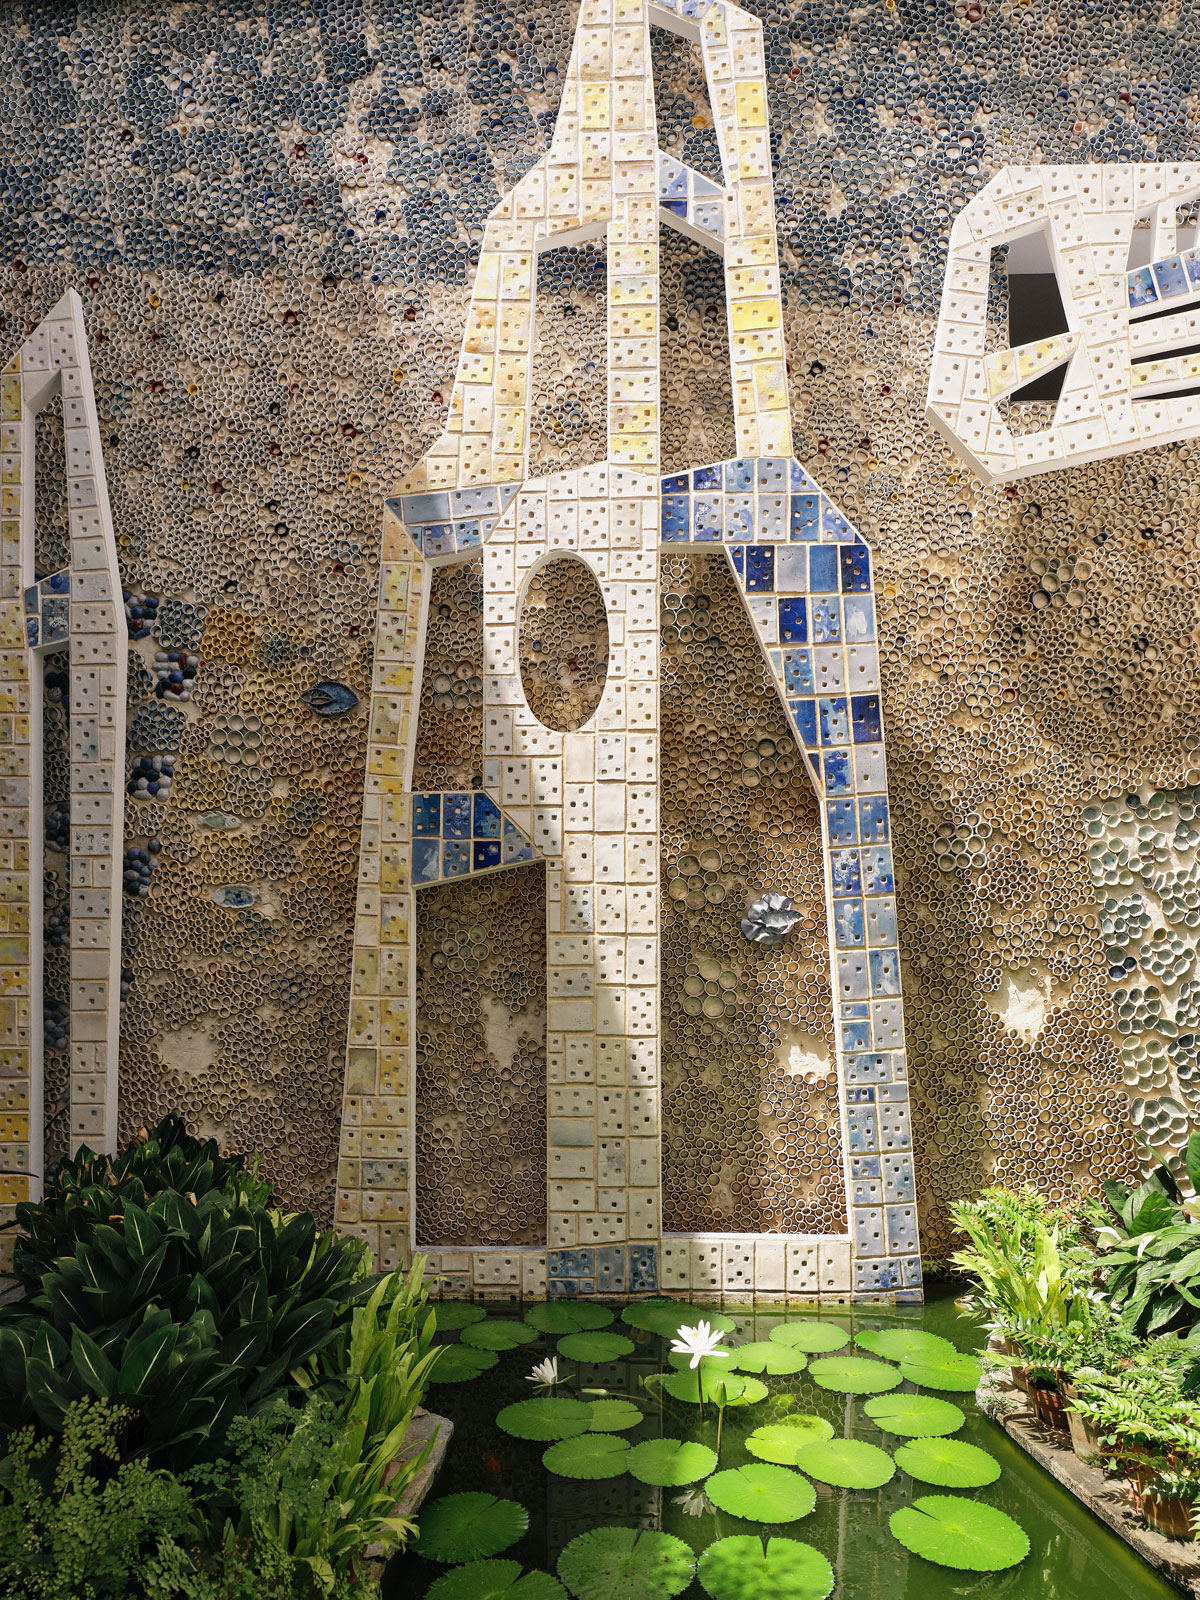 The atrium connects with an outdoor living room full of colors and texture, dominated by a ceramic mosaic by sculptor Fausto Melotti